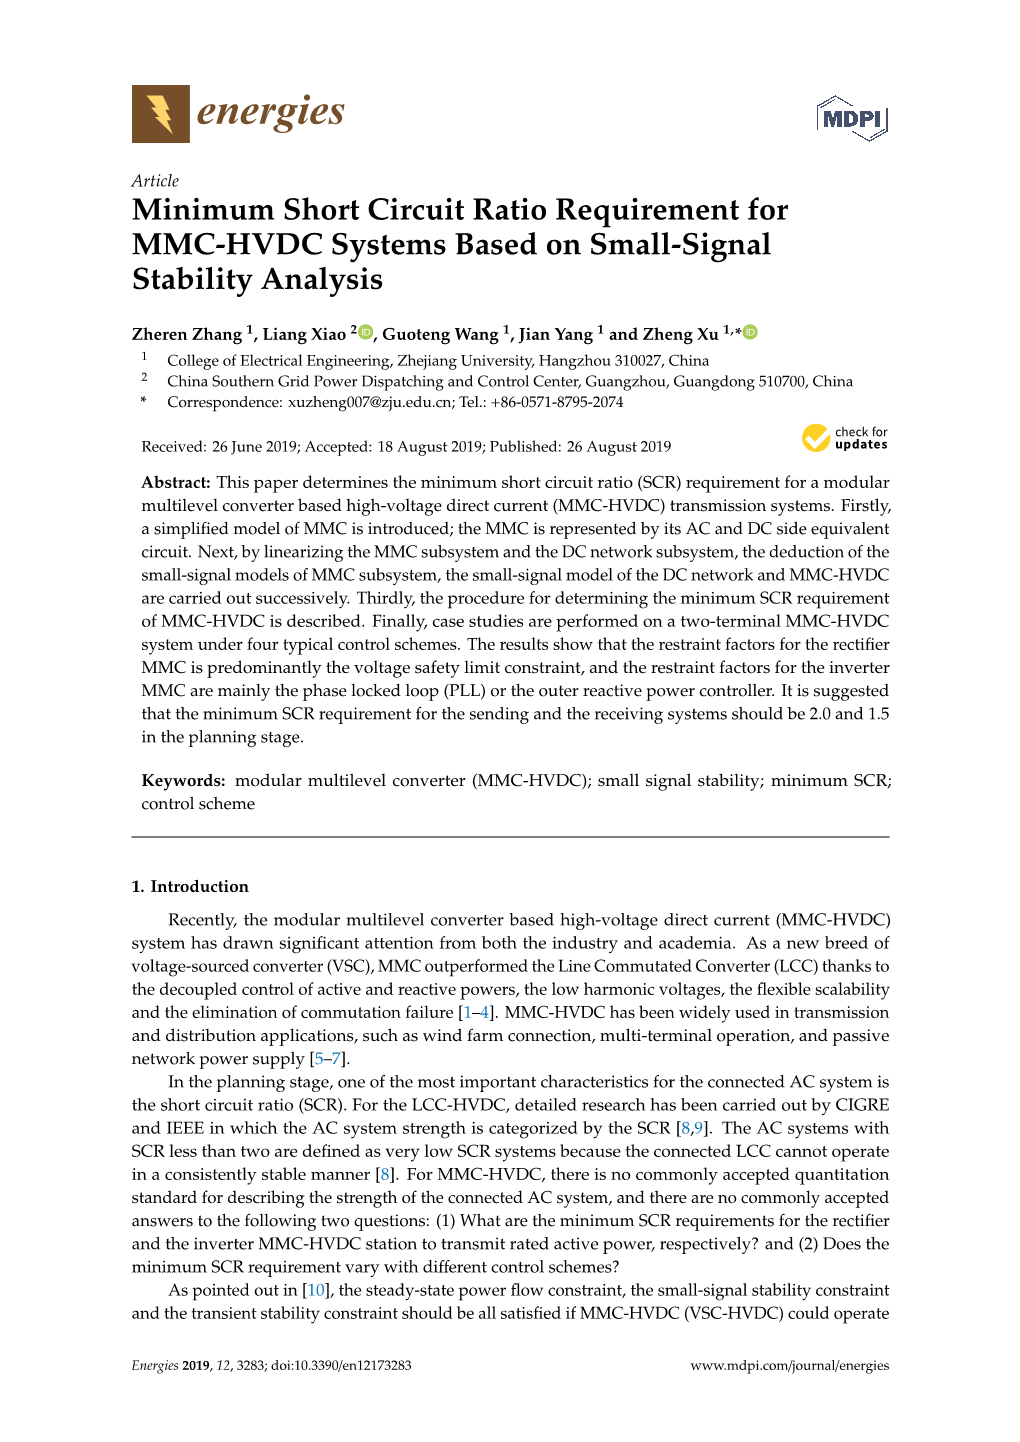 Minimum Short Circuit Ratio Requirement for MMC-HVDC Systems Based on Small-Signal Stability Analysis